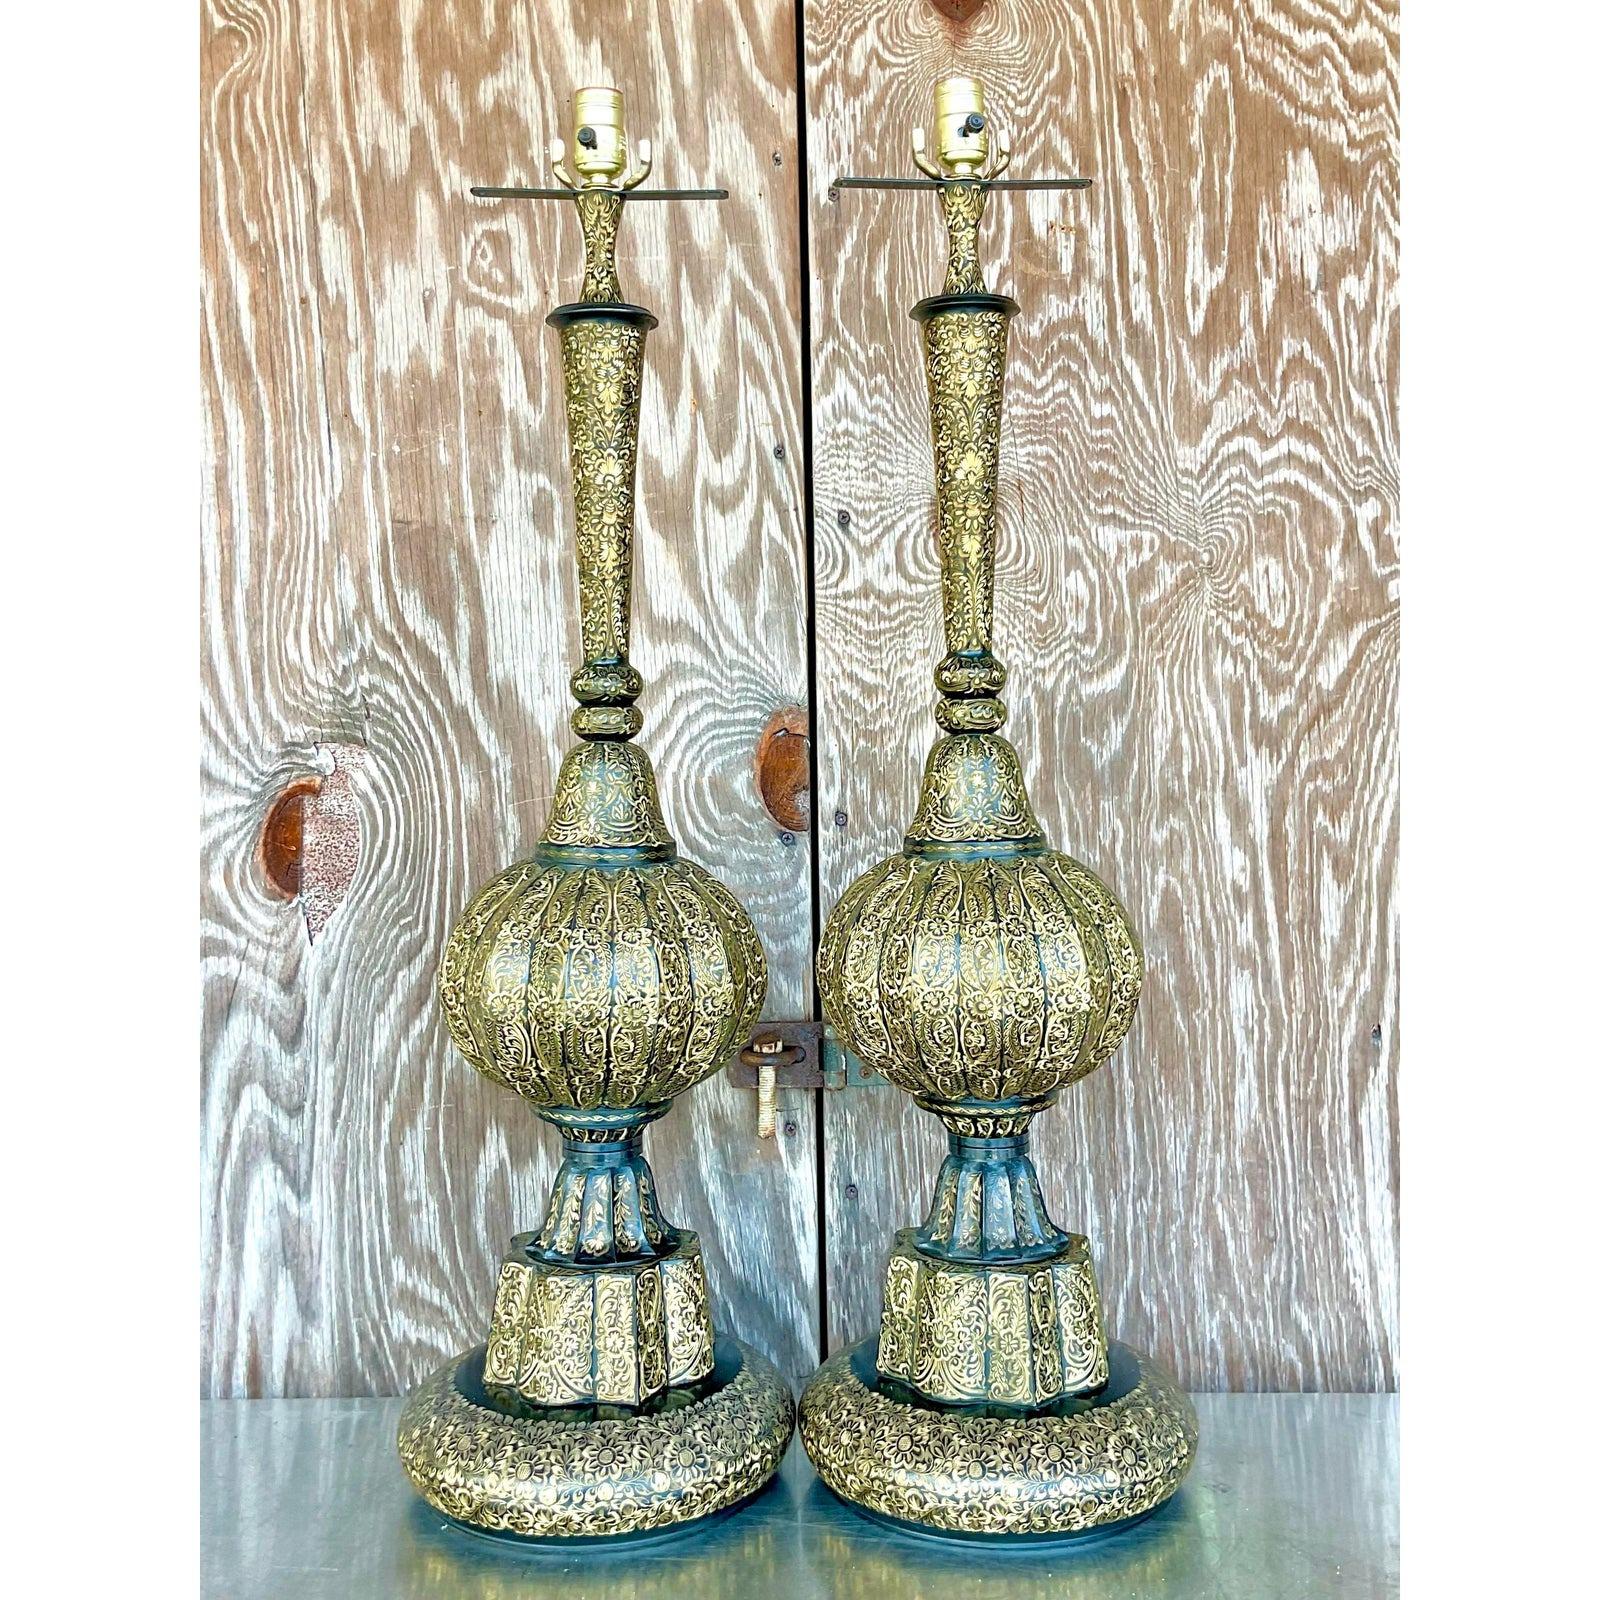 Vintage Boho Moroccan Etched Enamel and Brass Lamps - a Pair For Sale 4